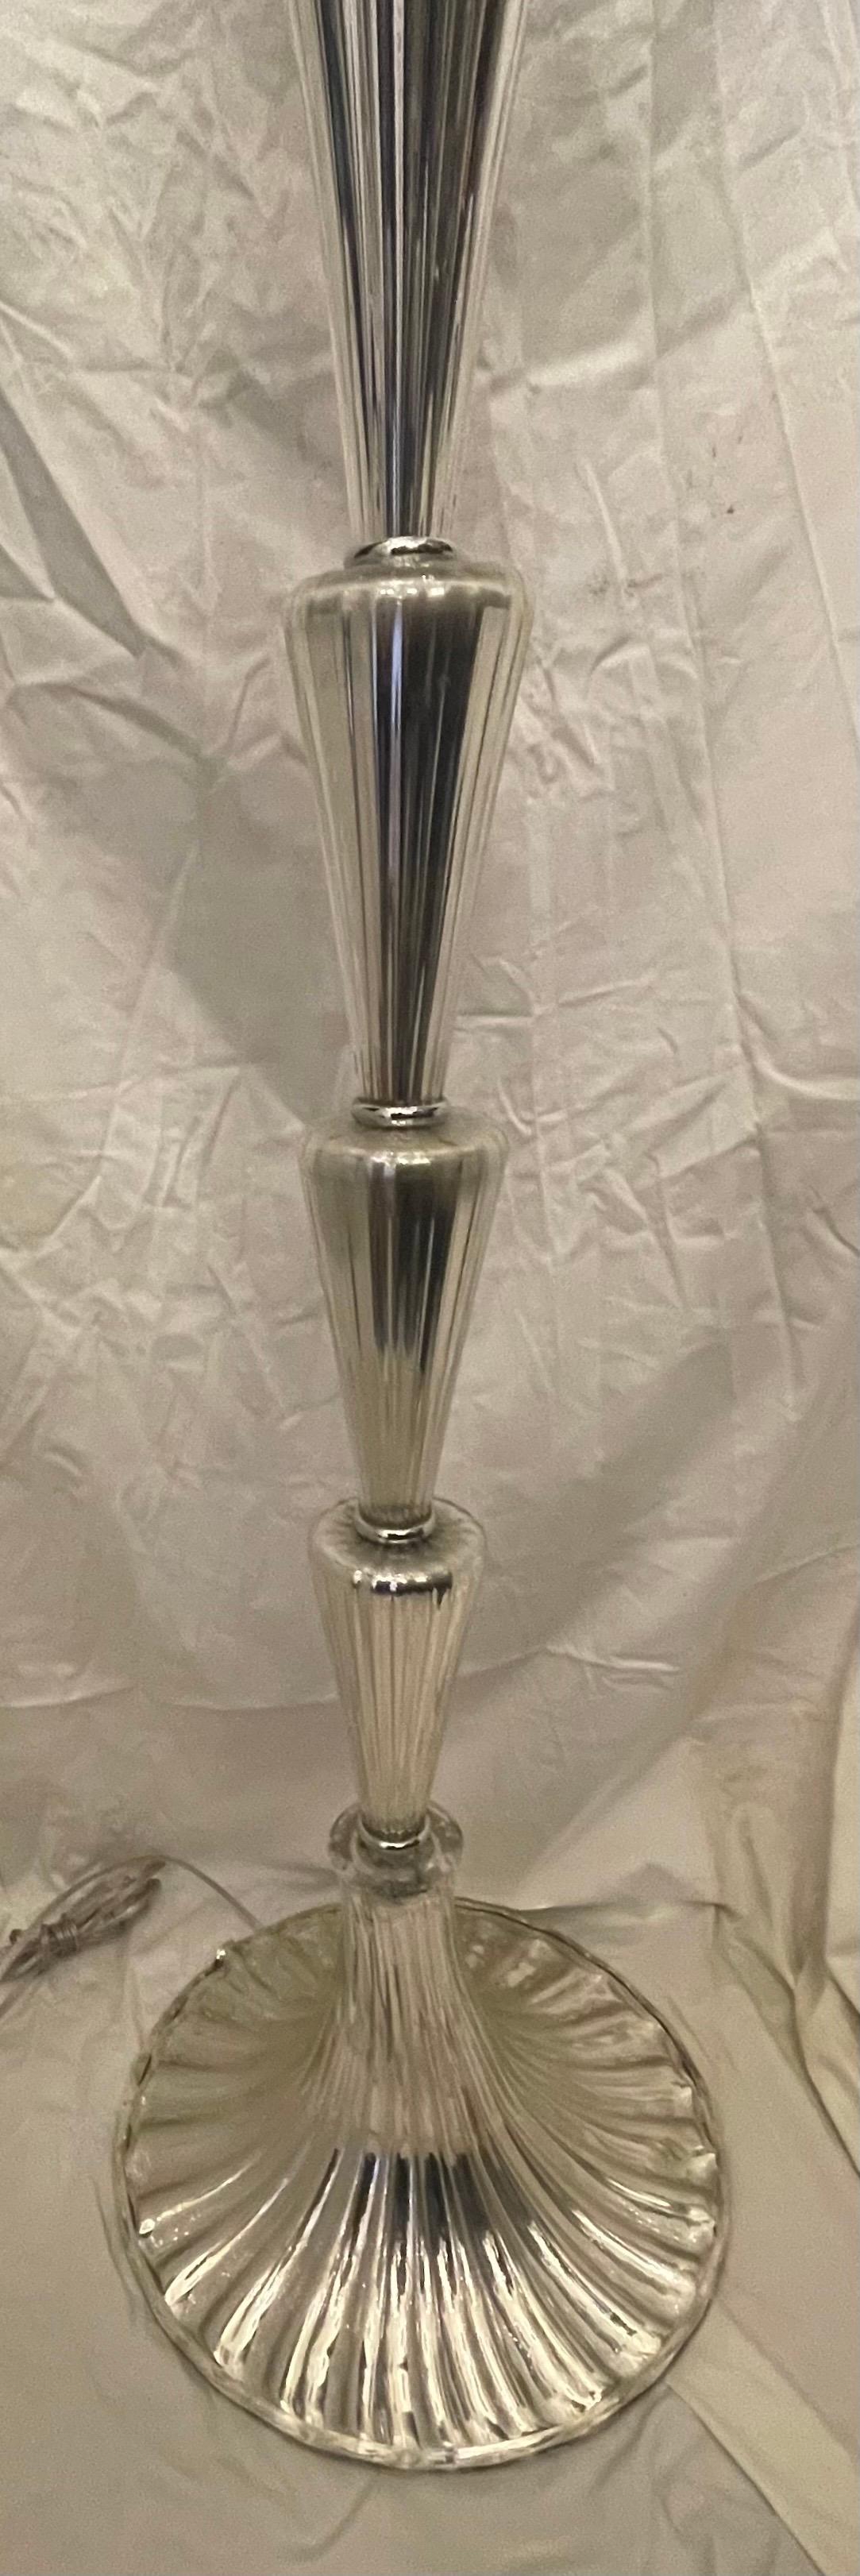 A Wonderful Mid Century Modern Lorin Marsh Venetian Murano Silvered Glass Floor Lamp Completely Rewired With New Polished Nickel Two Light Edison Socket Center Stem.